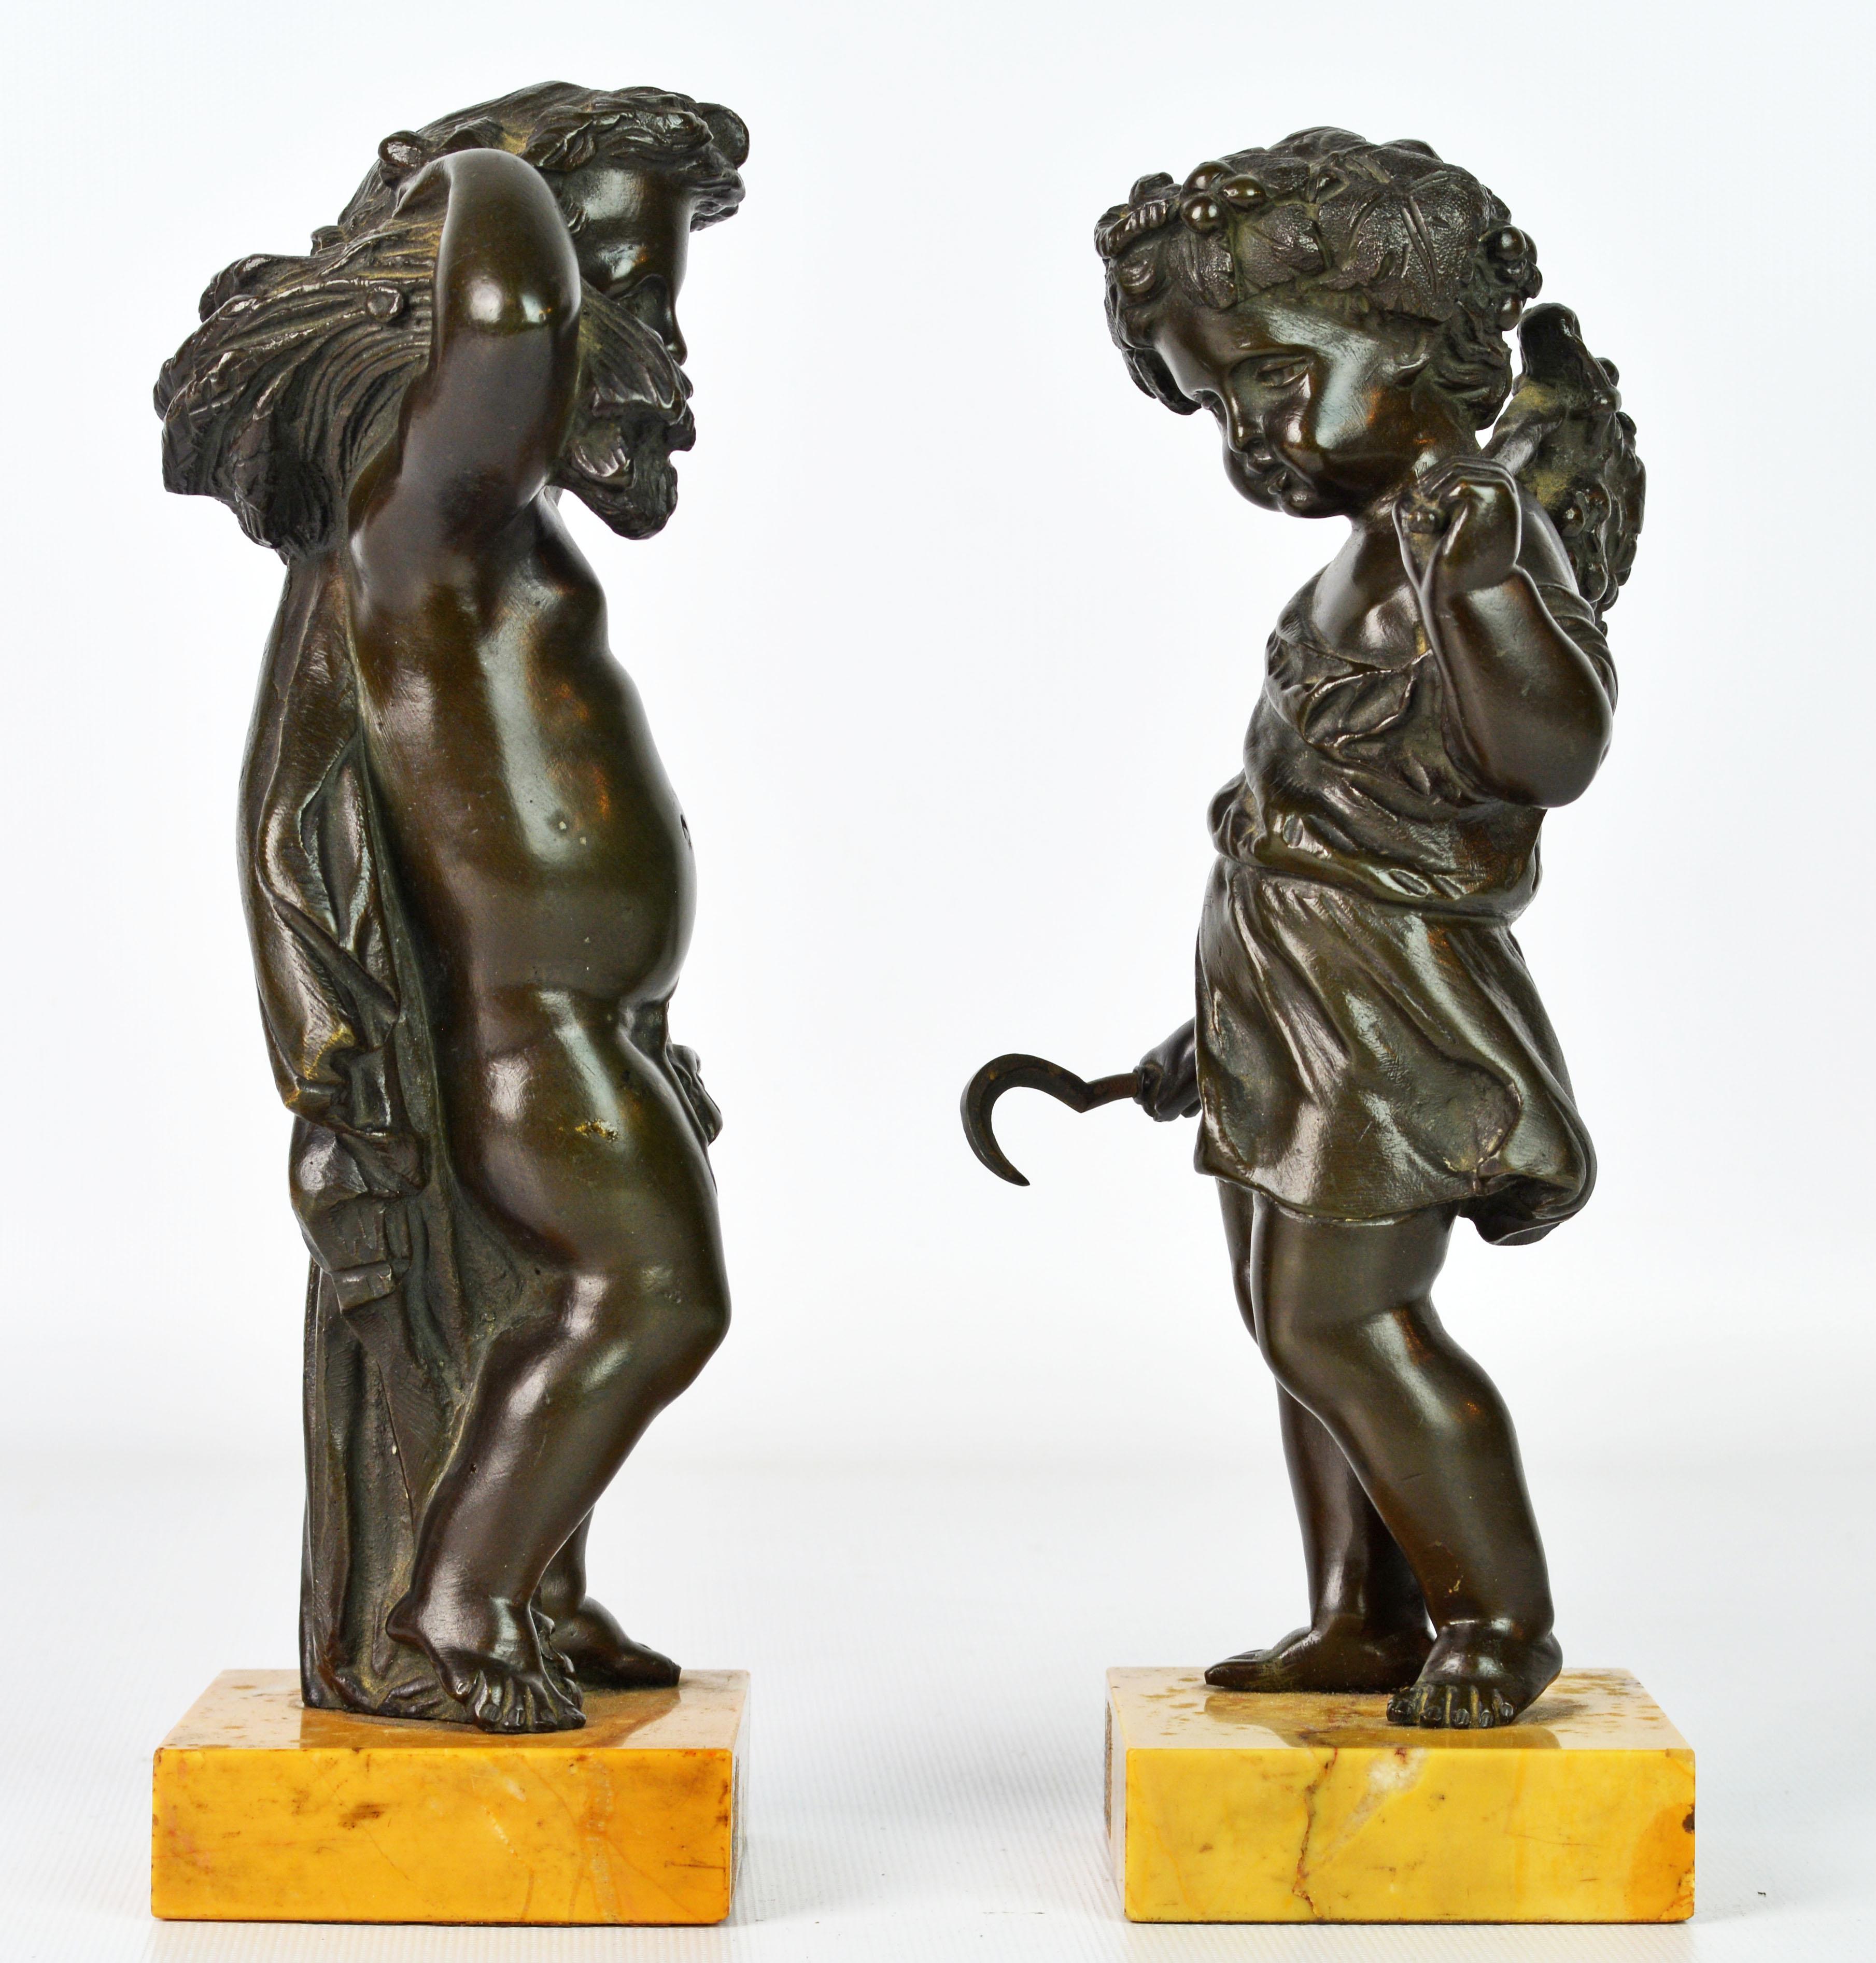 Baroque Pair of 19th Century Patinated Bronze Putti as Harvesters on Sienna Marble Bases